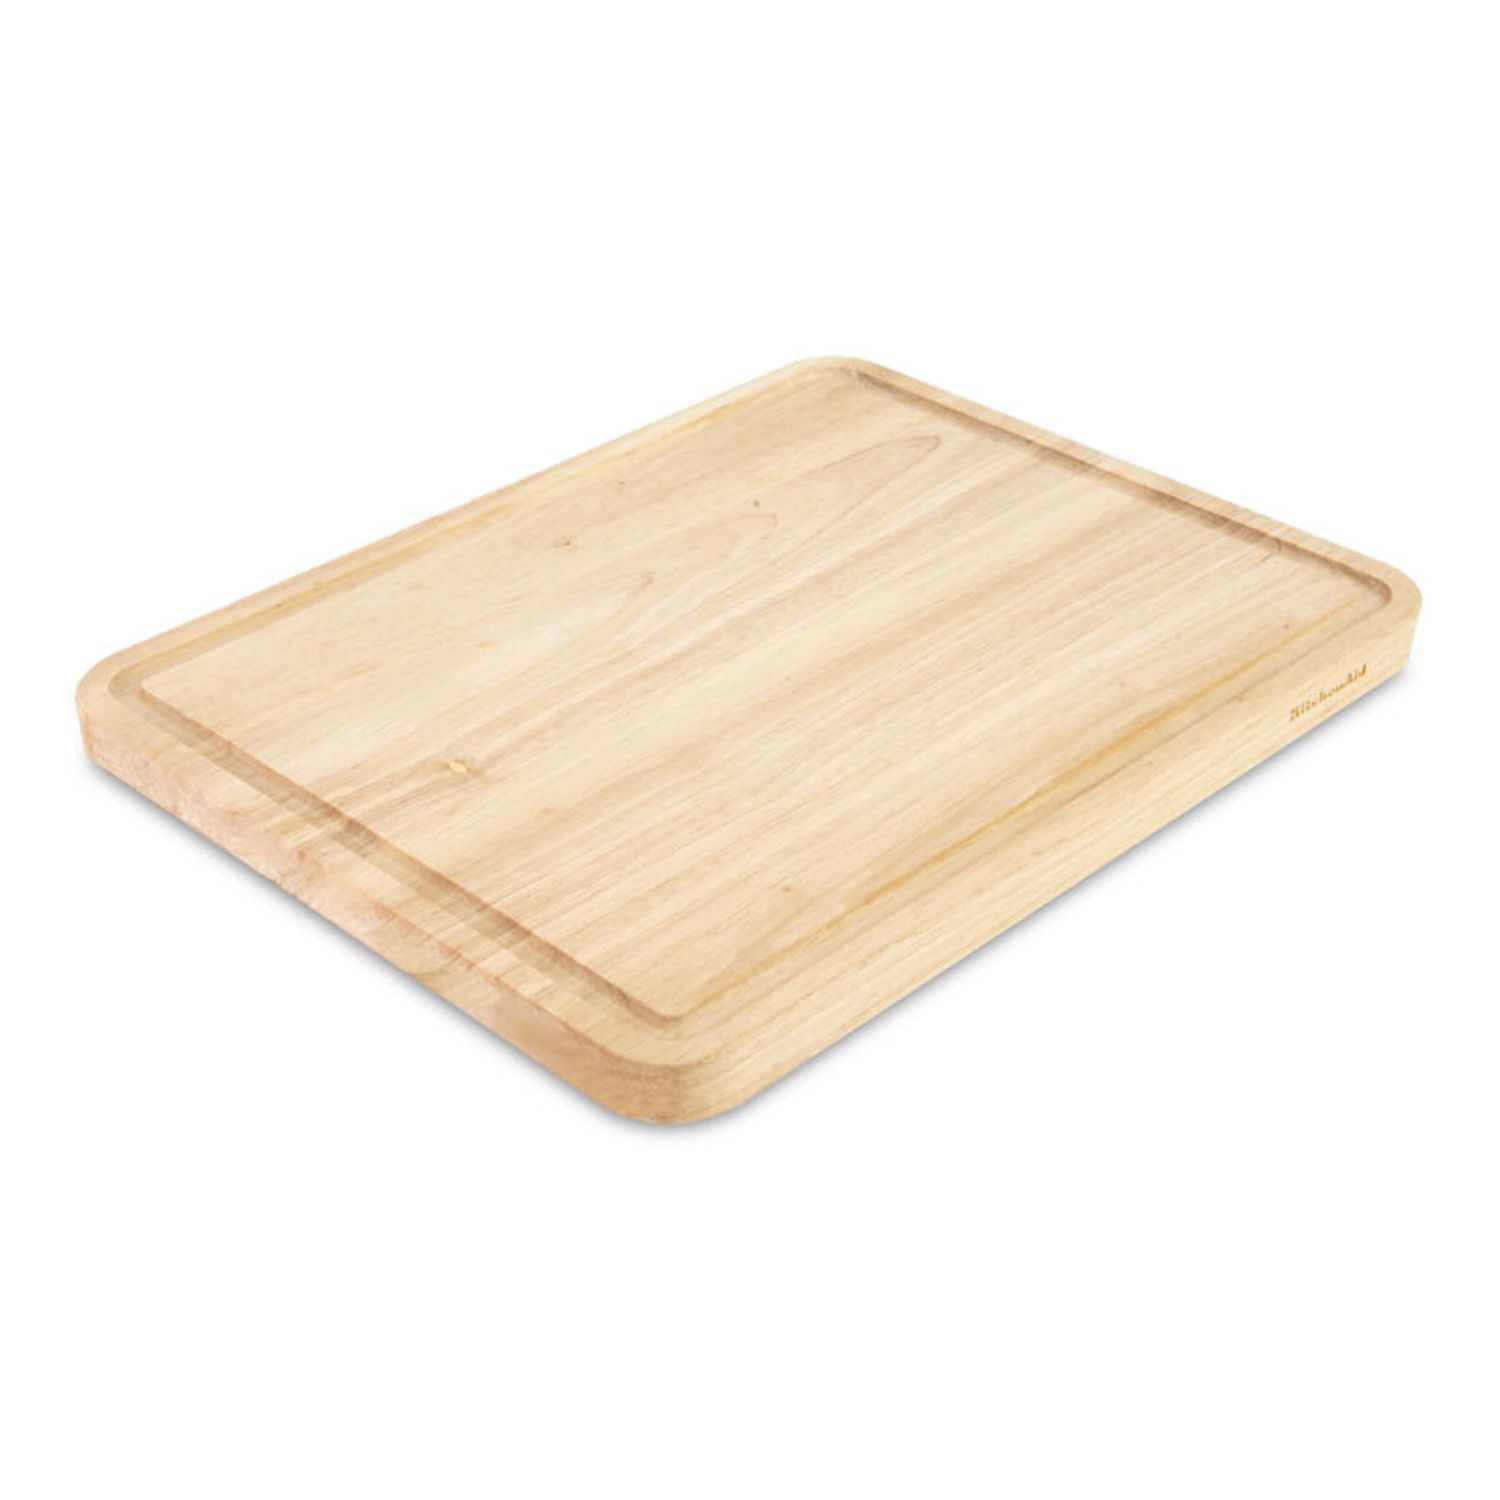 Farberware 11-inch x 14-inch Thick Bamboo Cutting Board with